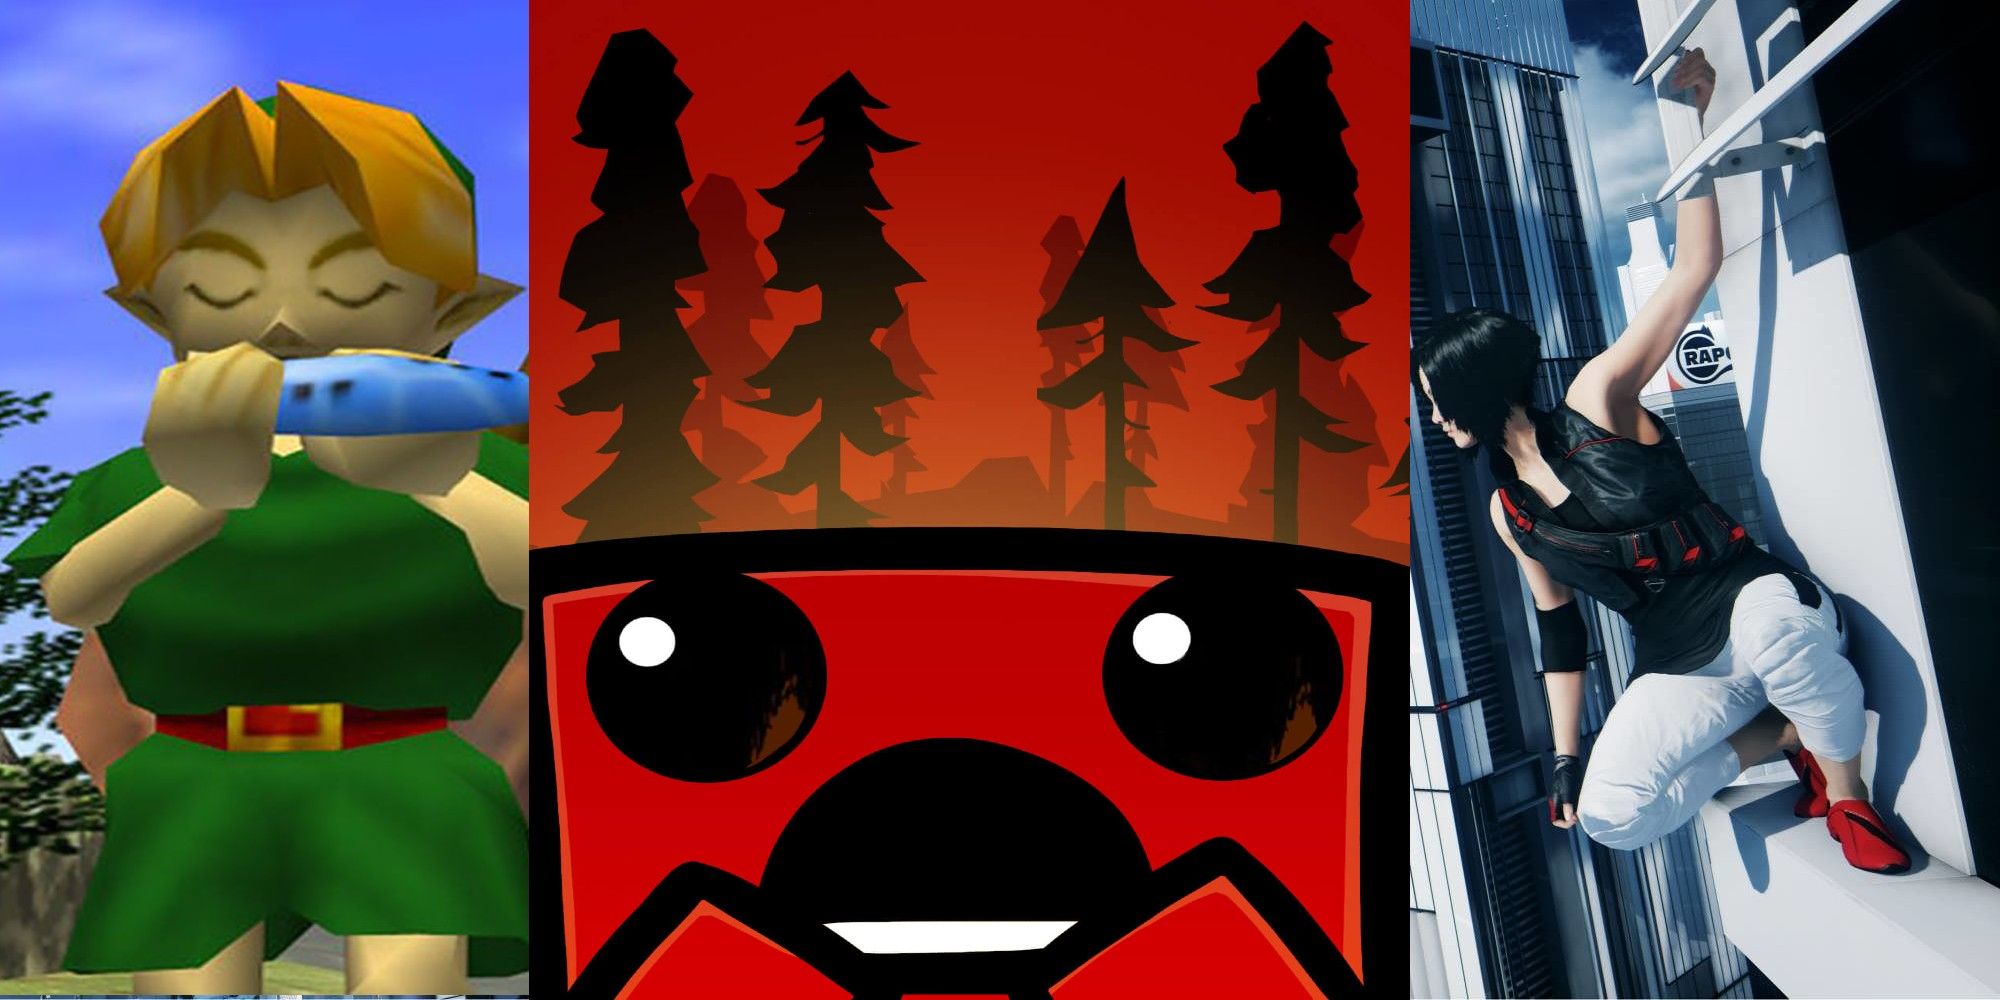 legend of zelda ocarina of time, super meat boy, and mirror's edge merged together